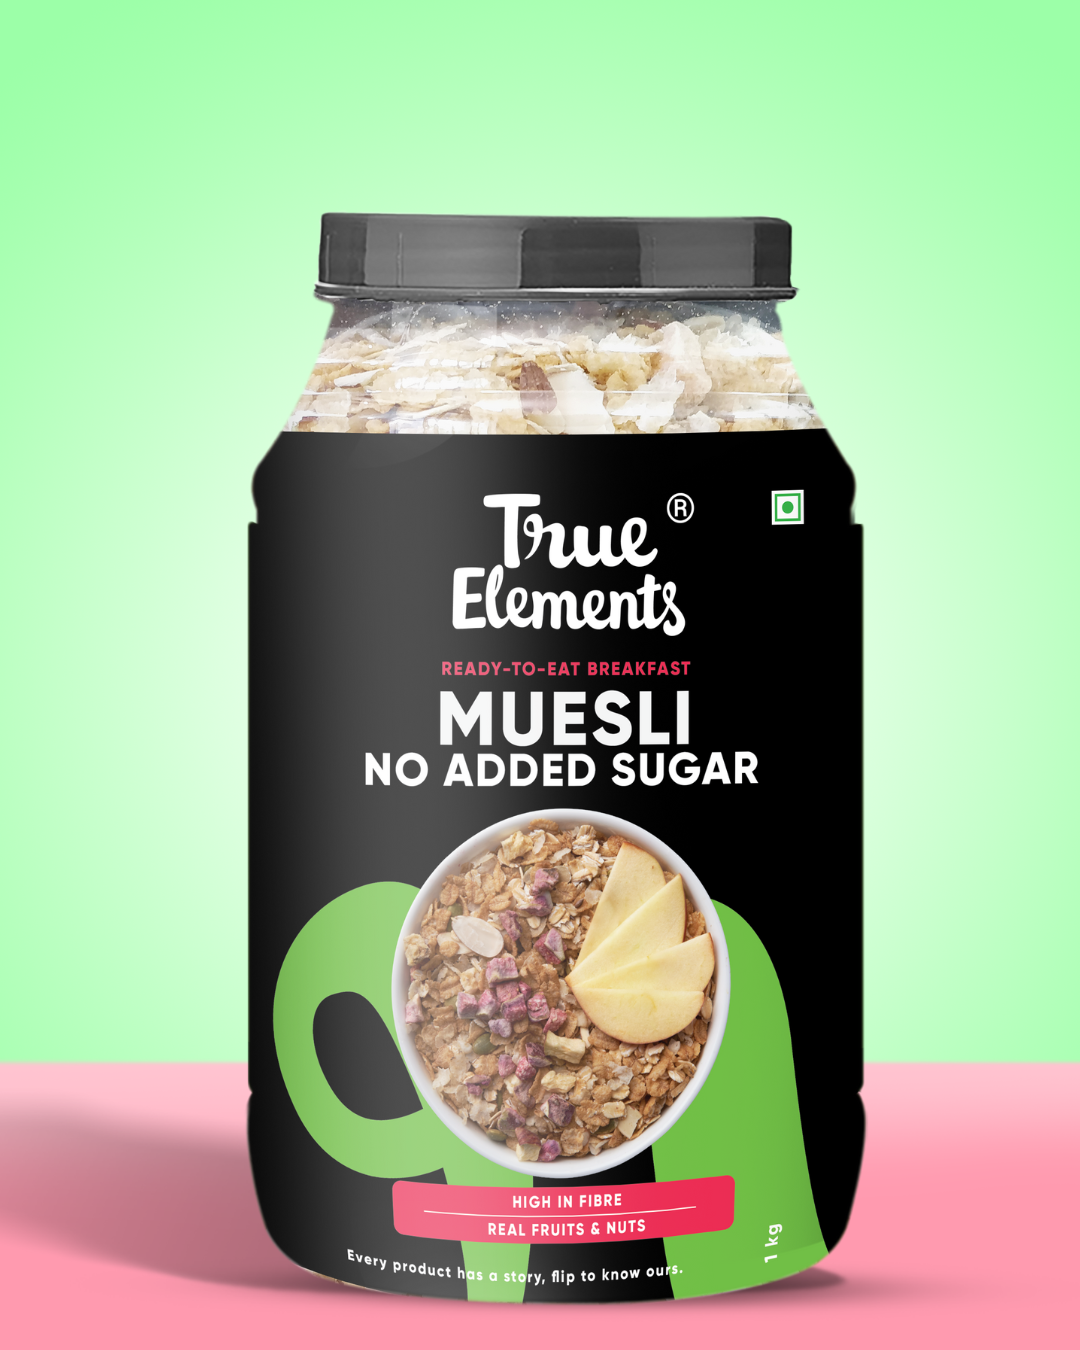 No Added Sugar Muesli - Diabetic Friendly (Contains 13.5g Protein)